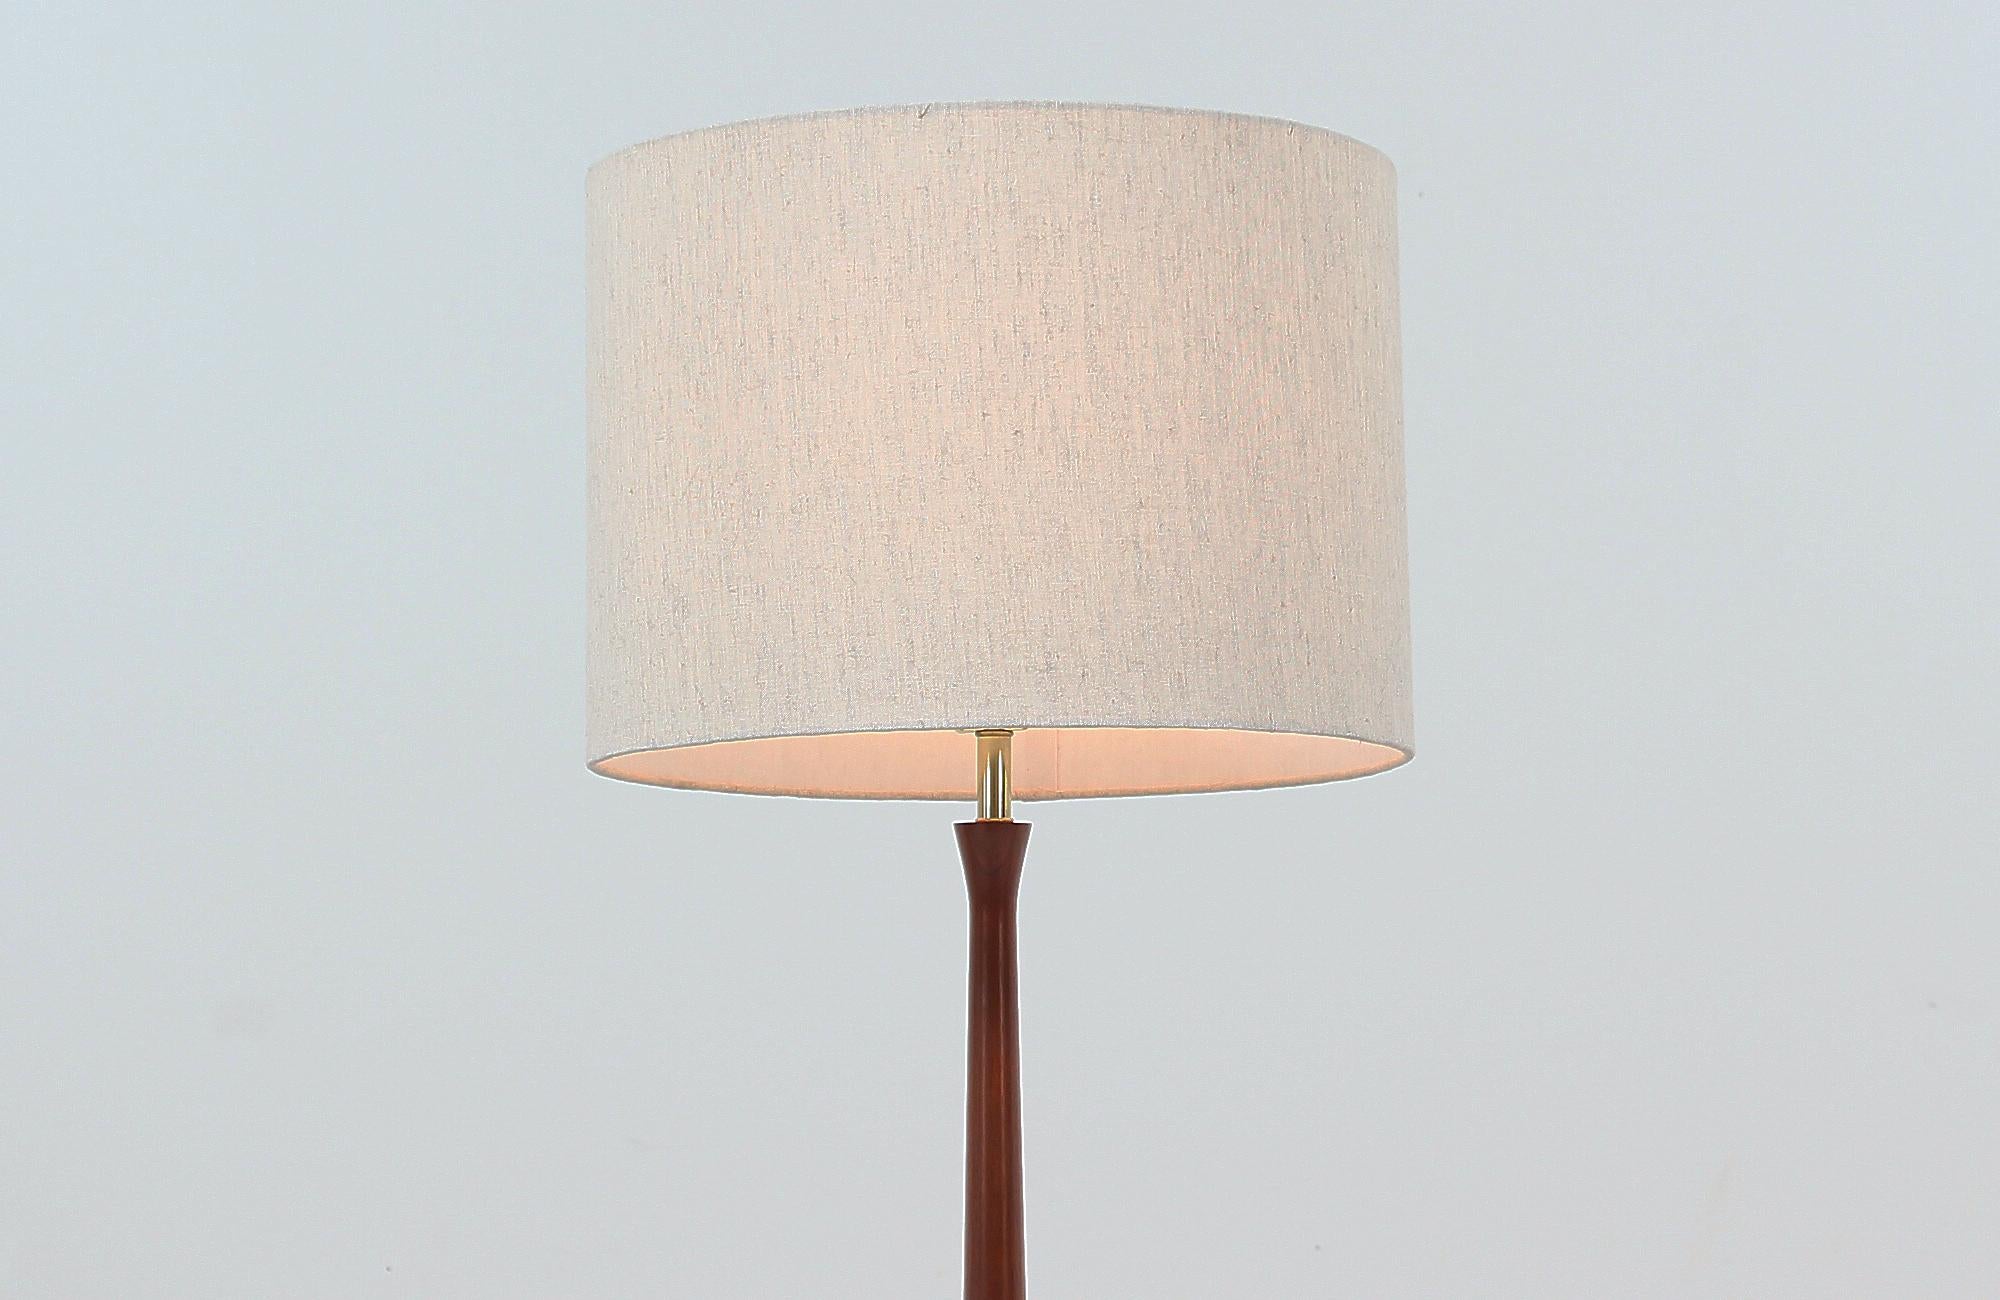 American Mid-Century Floor Lamp with Magazine Tray by Laurel